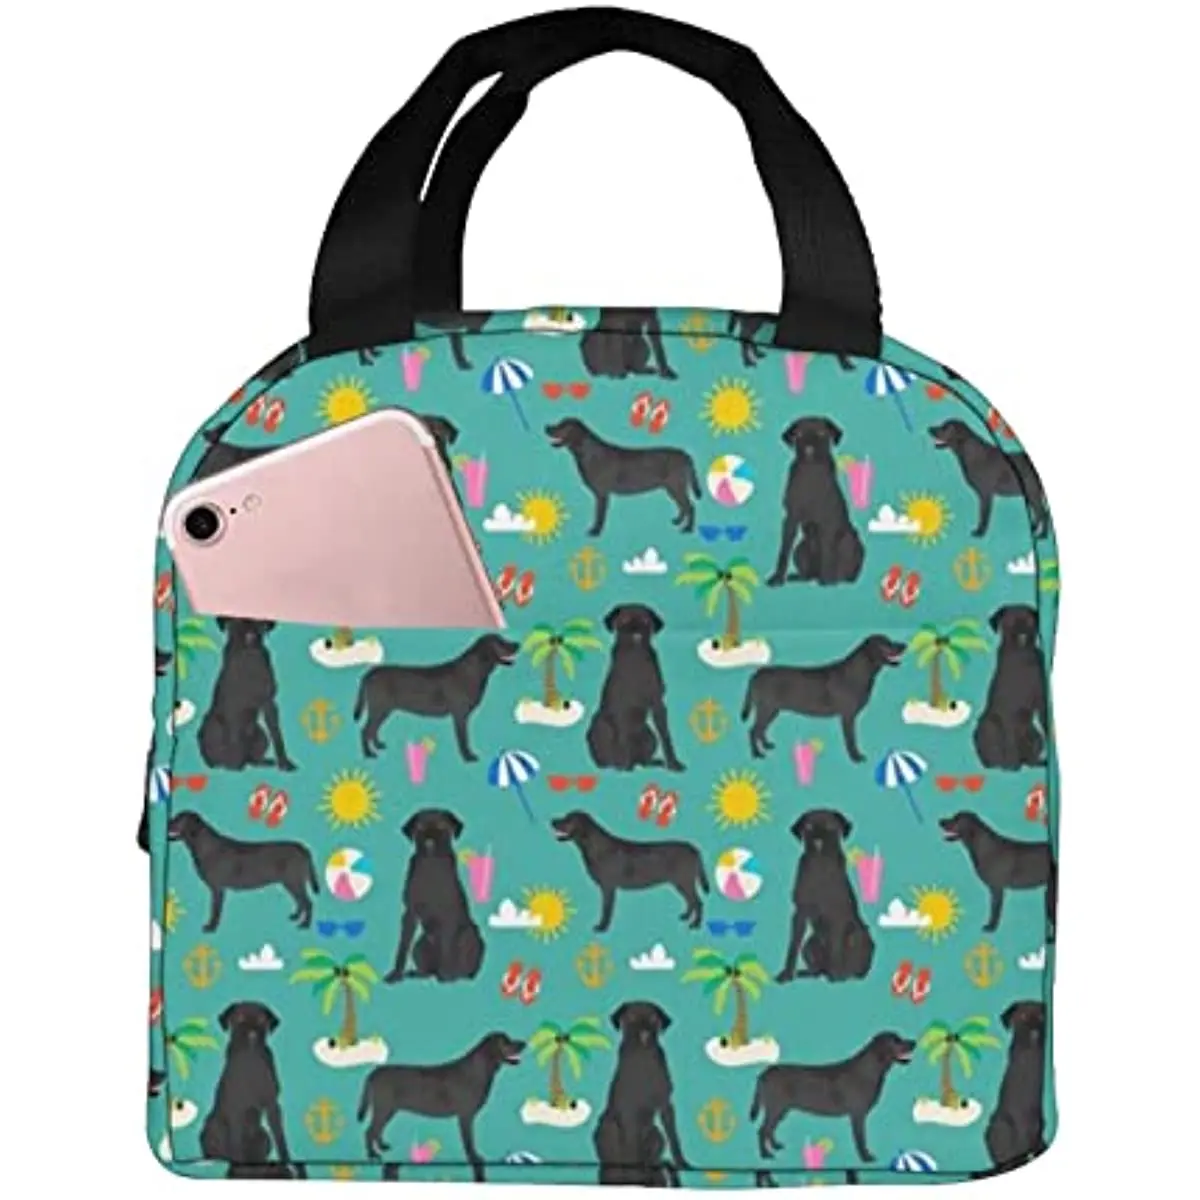 

Black Lab Labrador Retriever Beach Summer Dog Breed Teal Lunch Bag, Reusable Cute Lunch Box Insulated Cooler Tote Bag